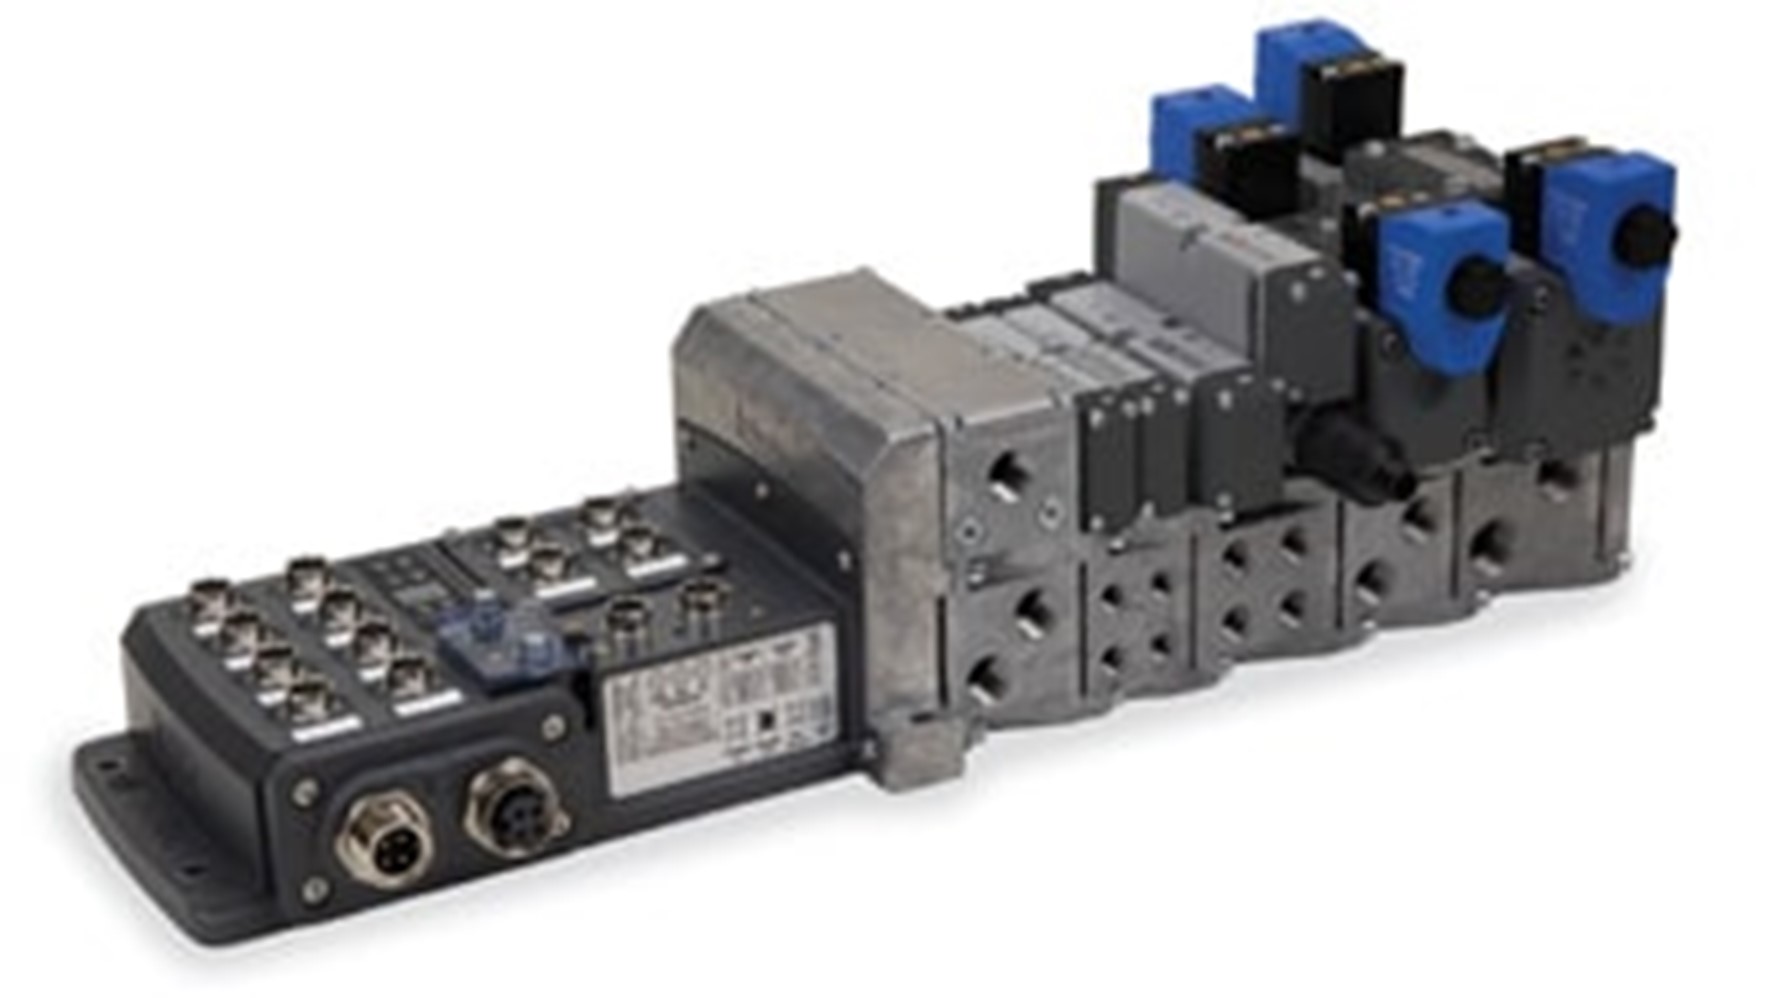 Parker’s PCH Network Portal provides a new approach to Ethernet communication modules